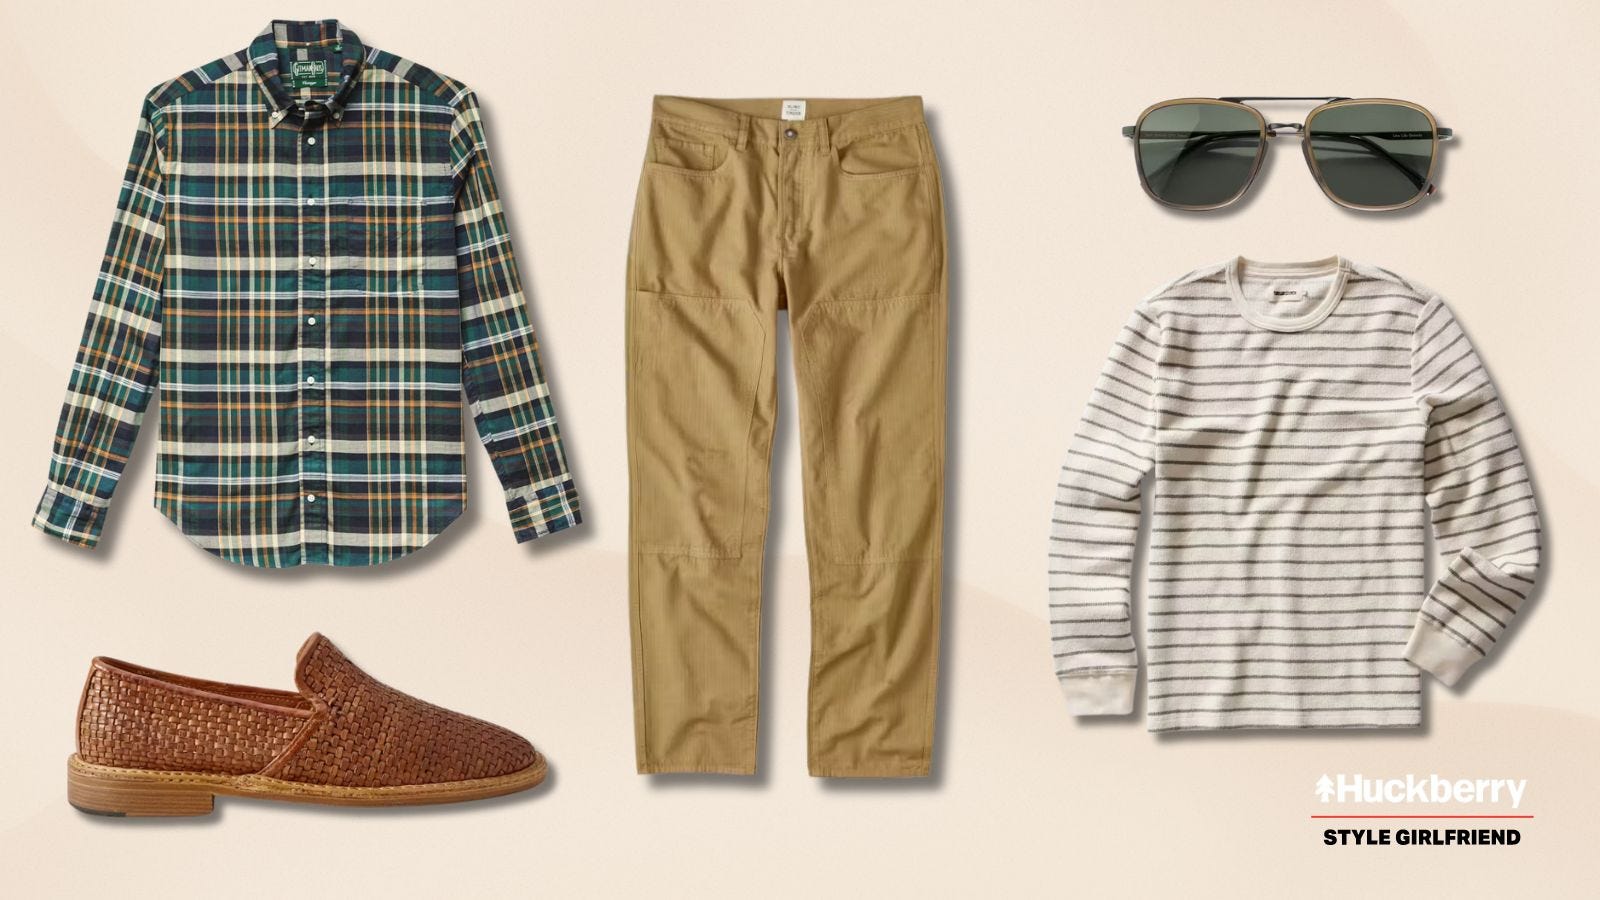 a casual men's outfit featuring tan linen workwear pants with a striped long-sleeve shirt and a green plaid shirt over that